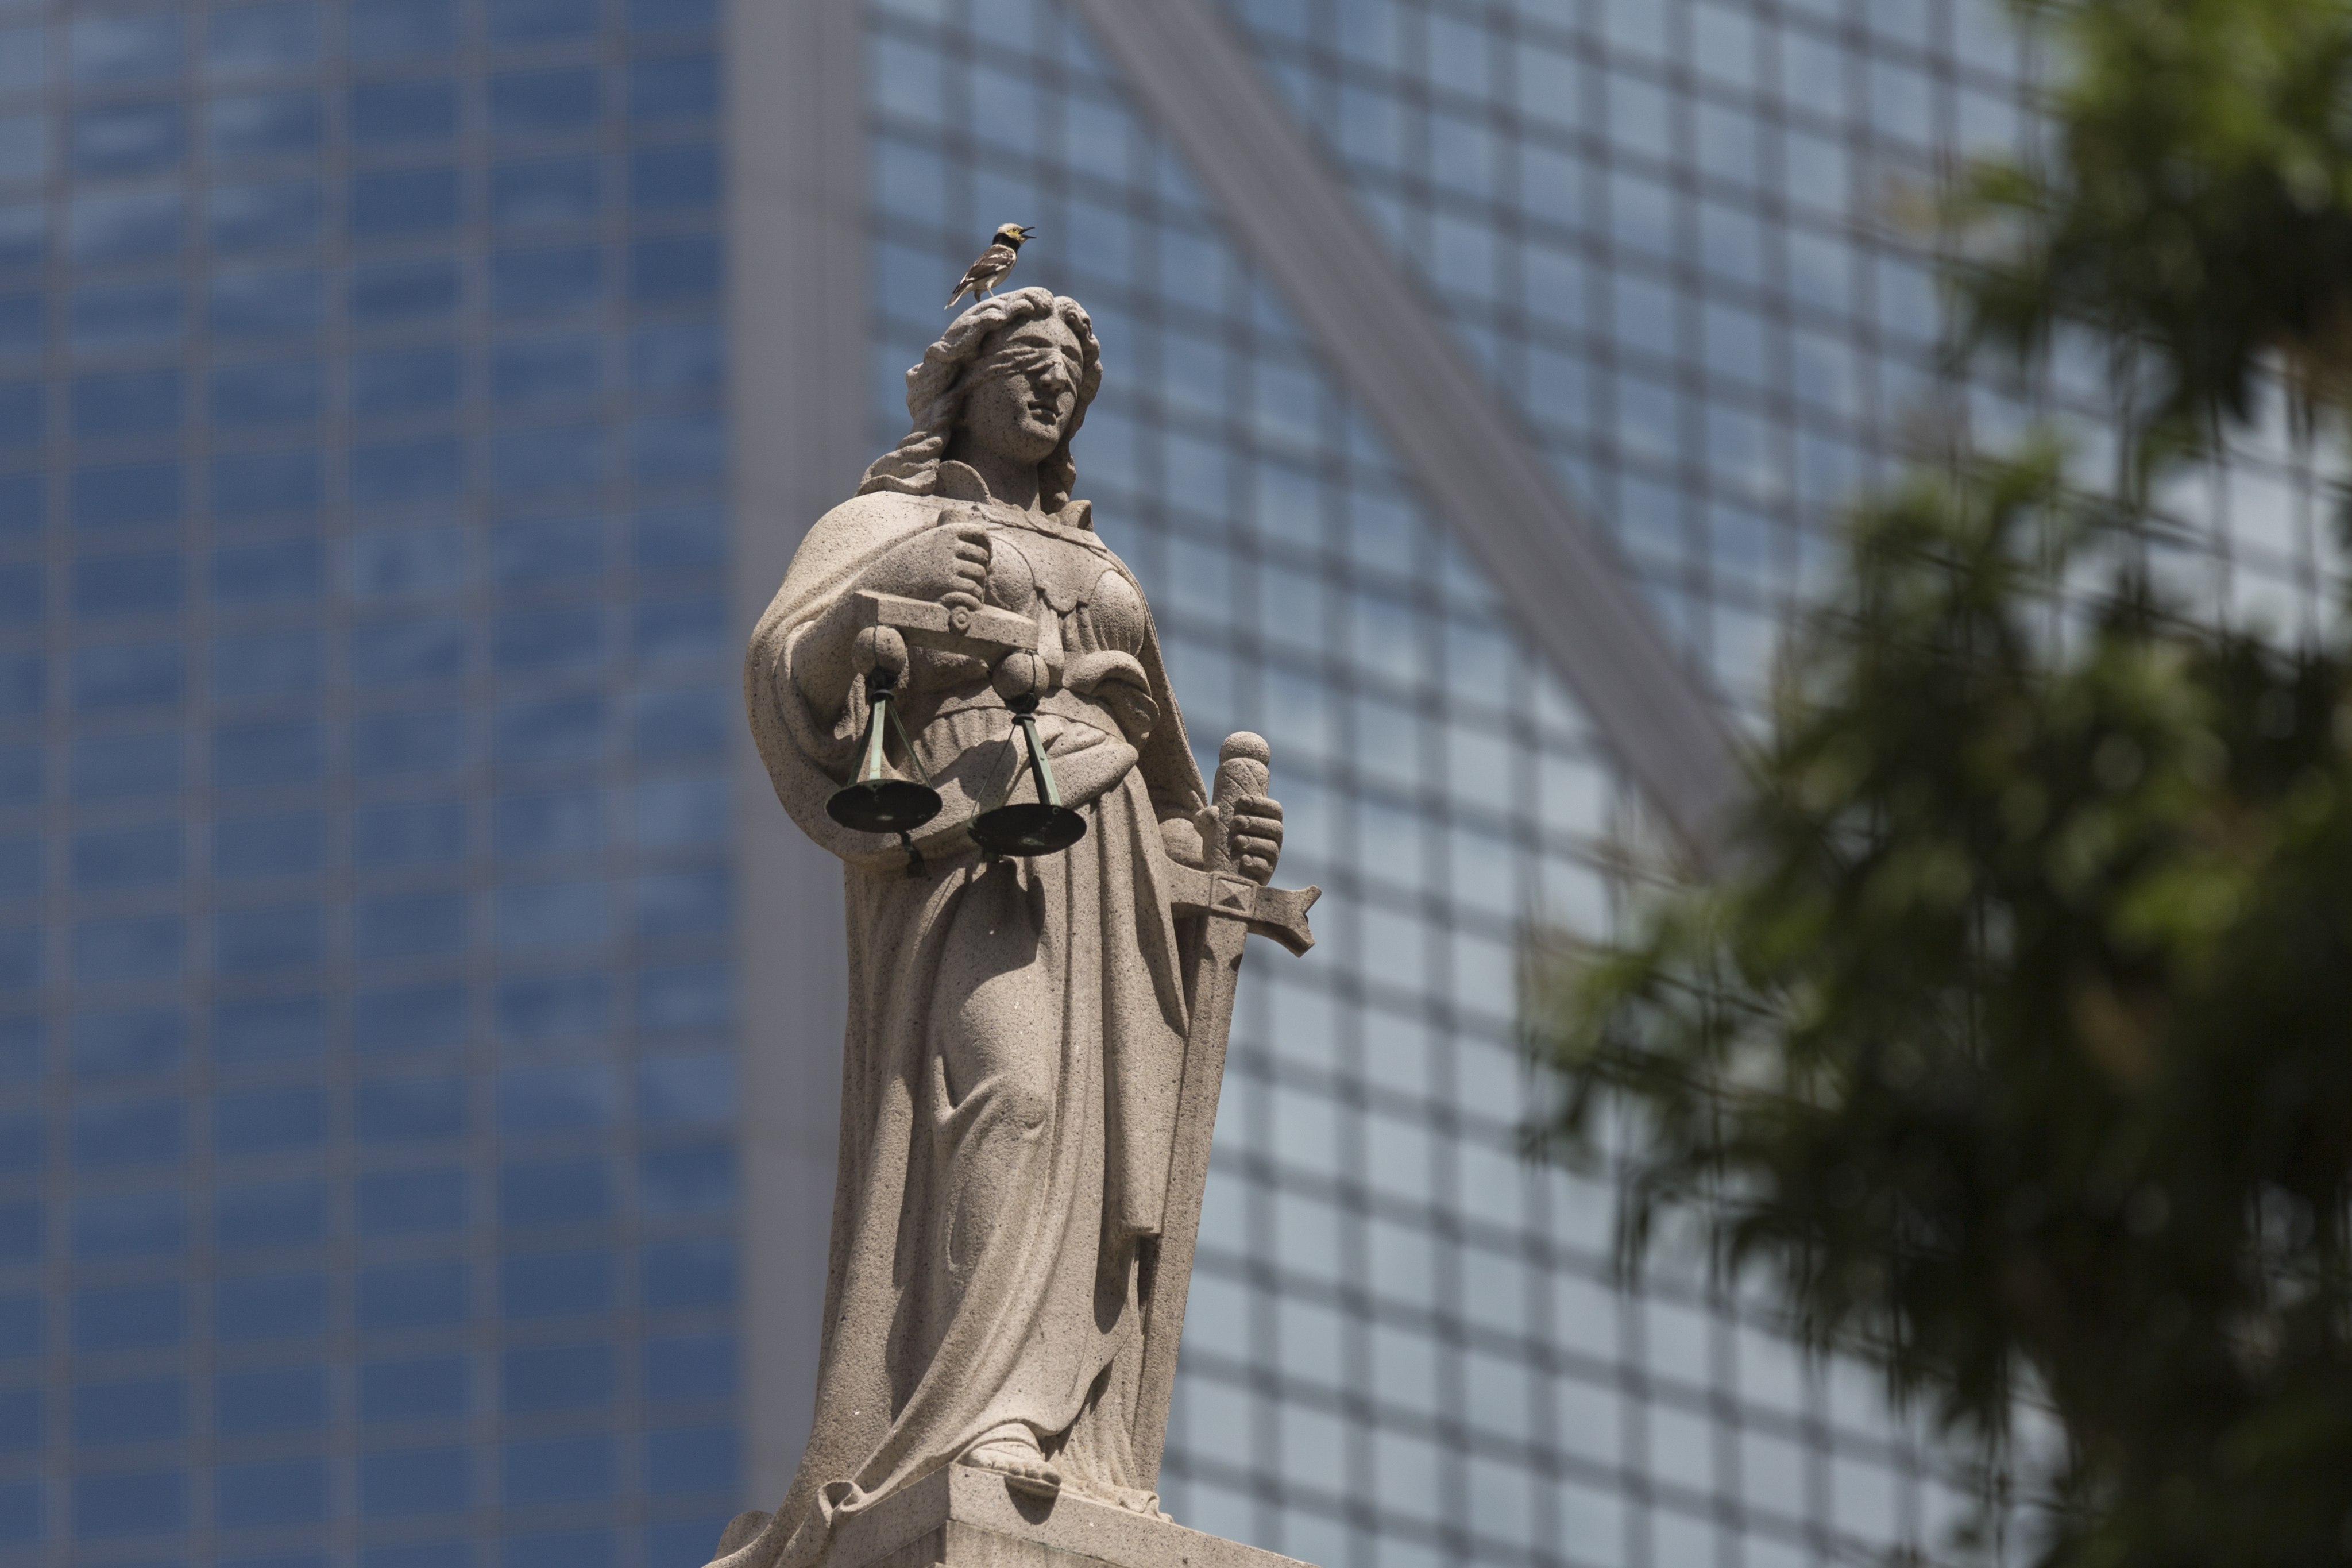 A statue representing Lady Justice is seen on the Court of Final Appeal building in Central, Hong Kong, in July 2018. Photo: EPA-EFE